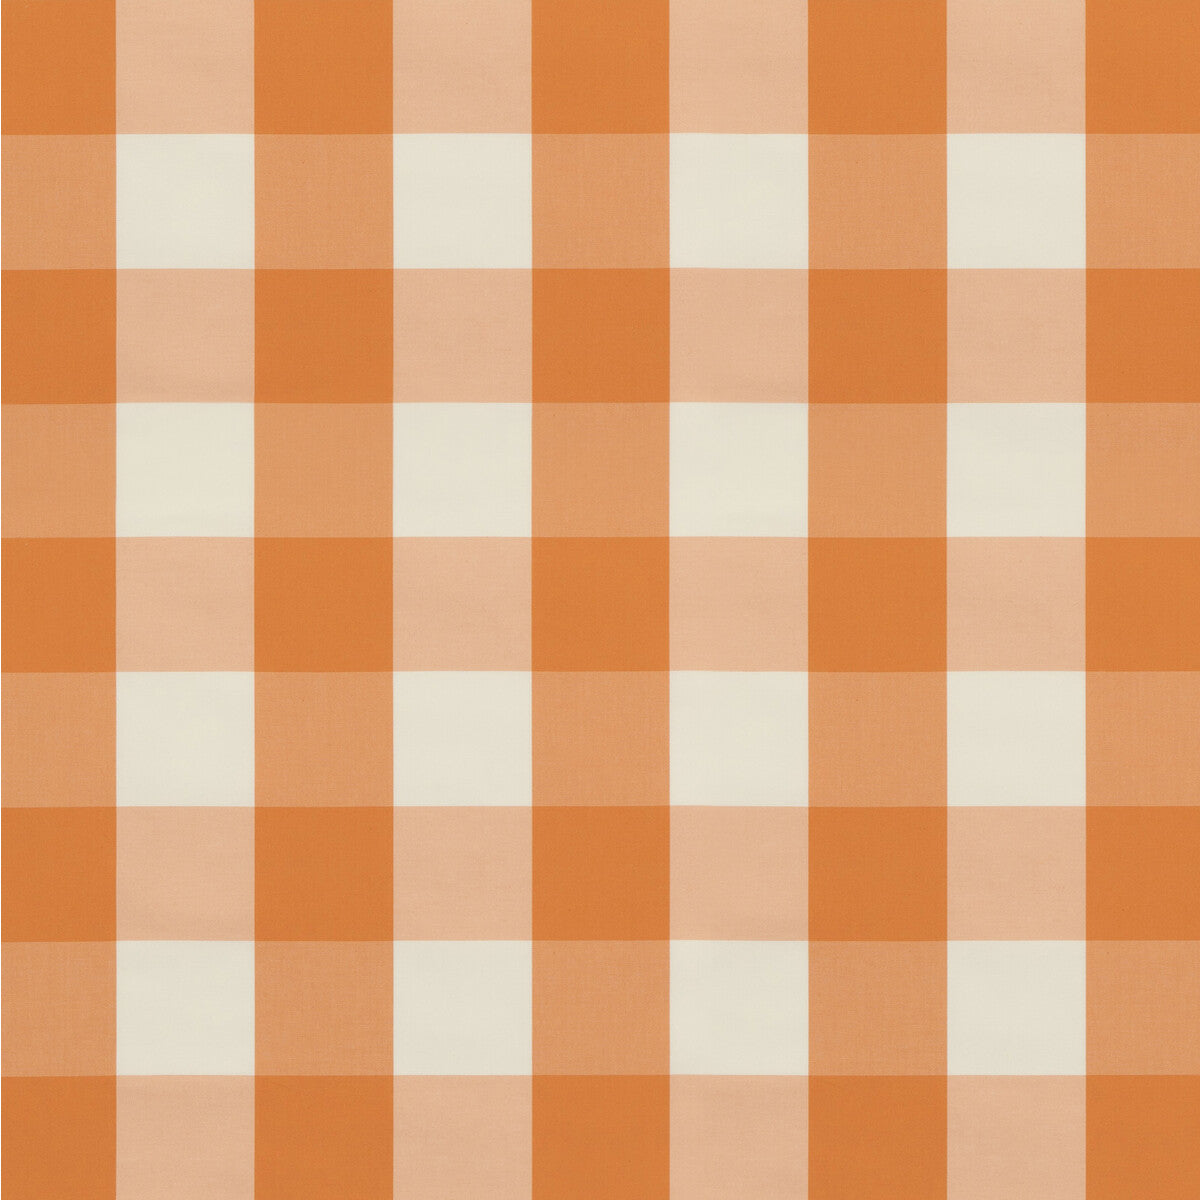 Lackland Check fabric in orange color - pattern 8019105.12.0 - by Brunschwig &amp; Fils in the Normant Checks And Stripes collection